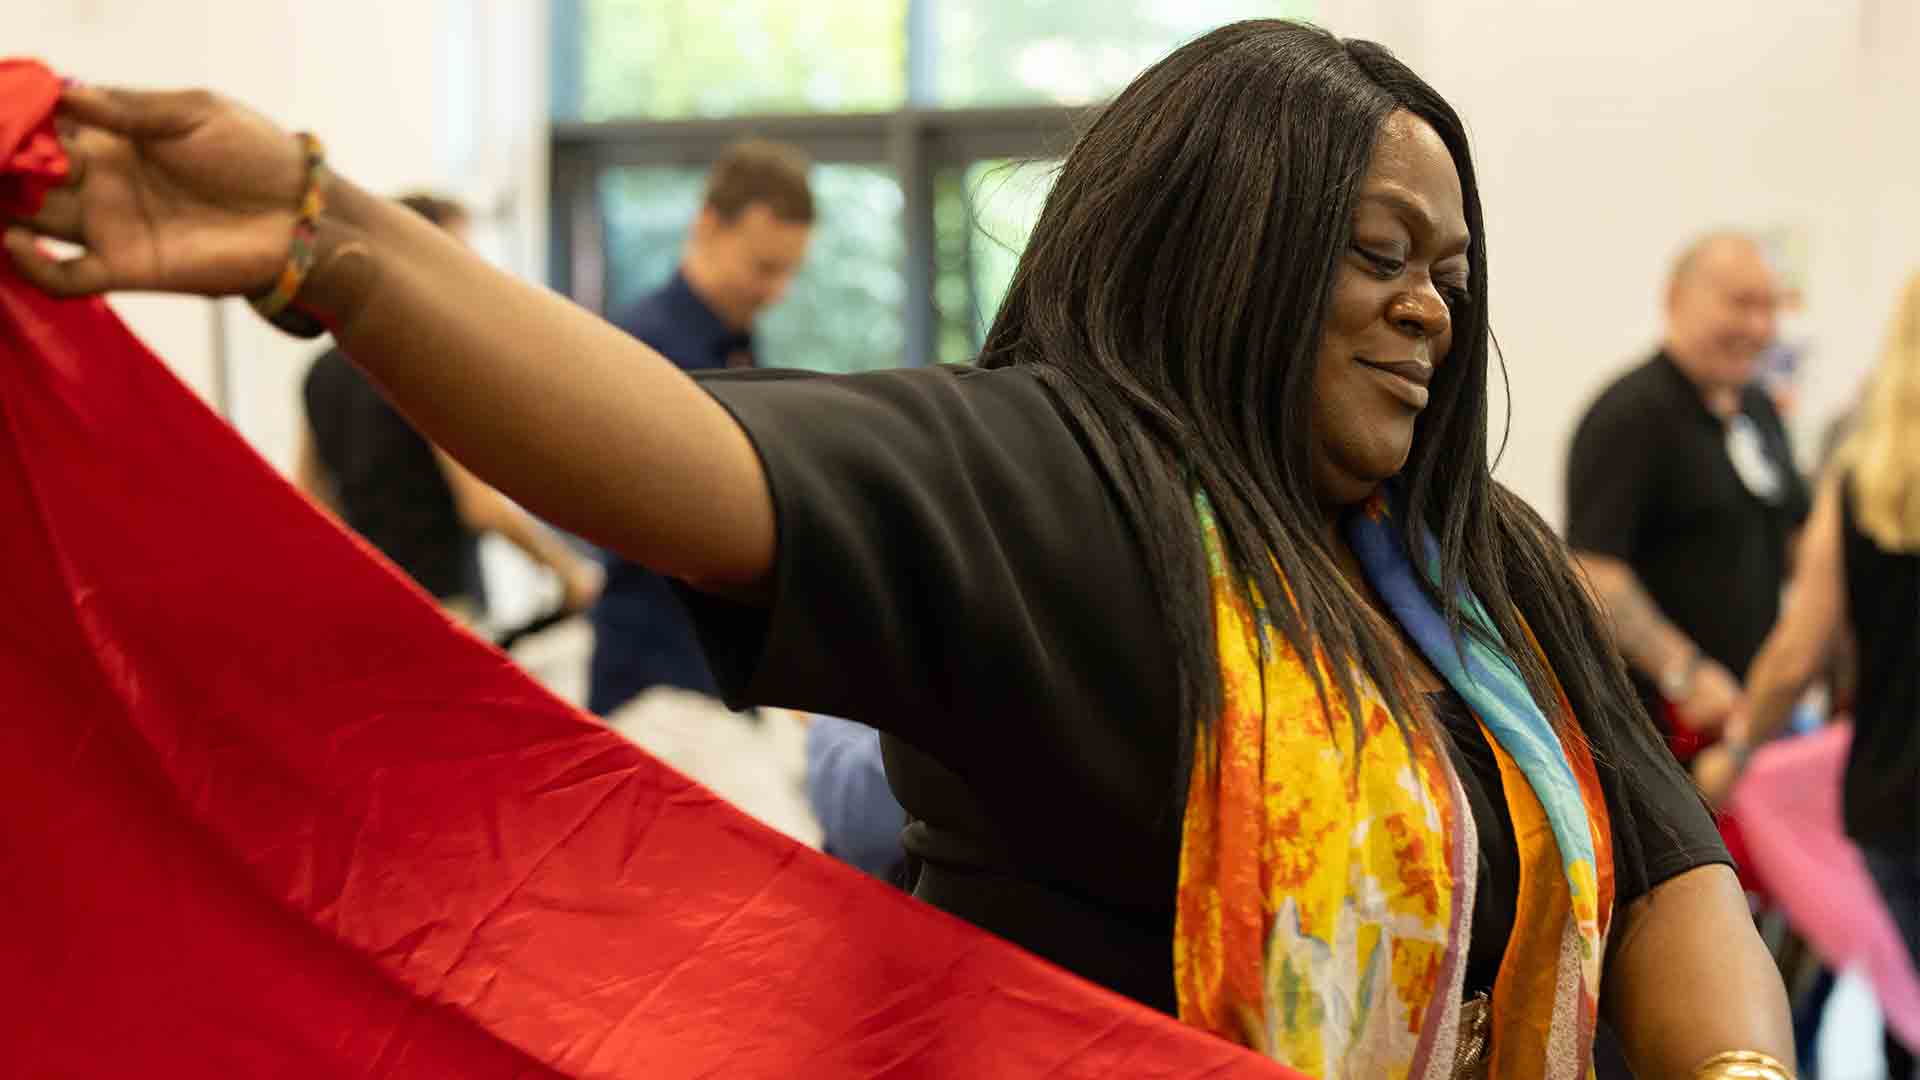 A student as part of a RCAW event, waving a red flag in a sports hall.